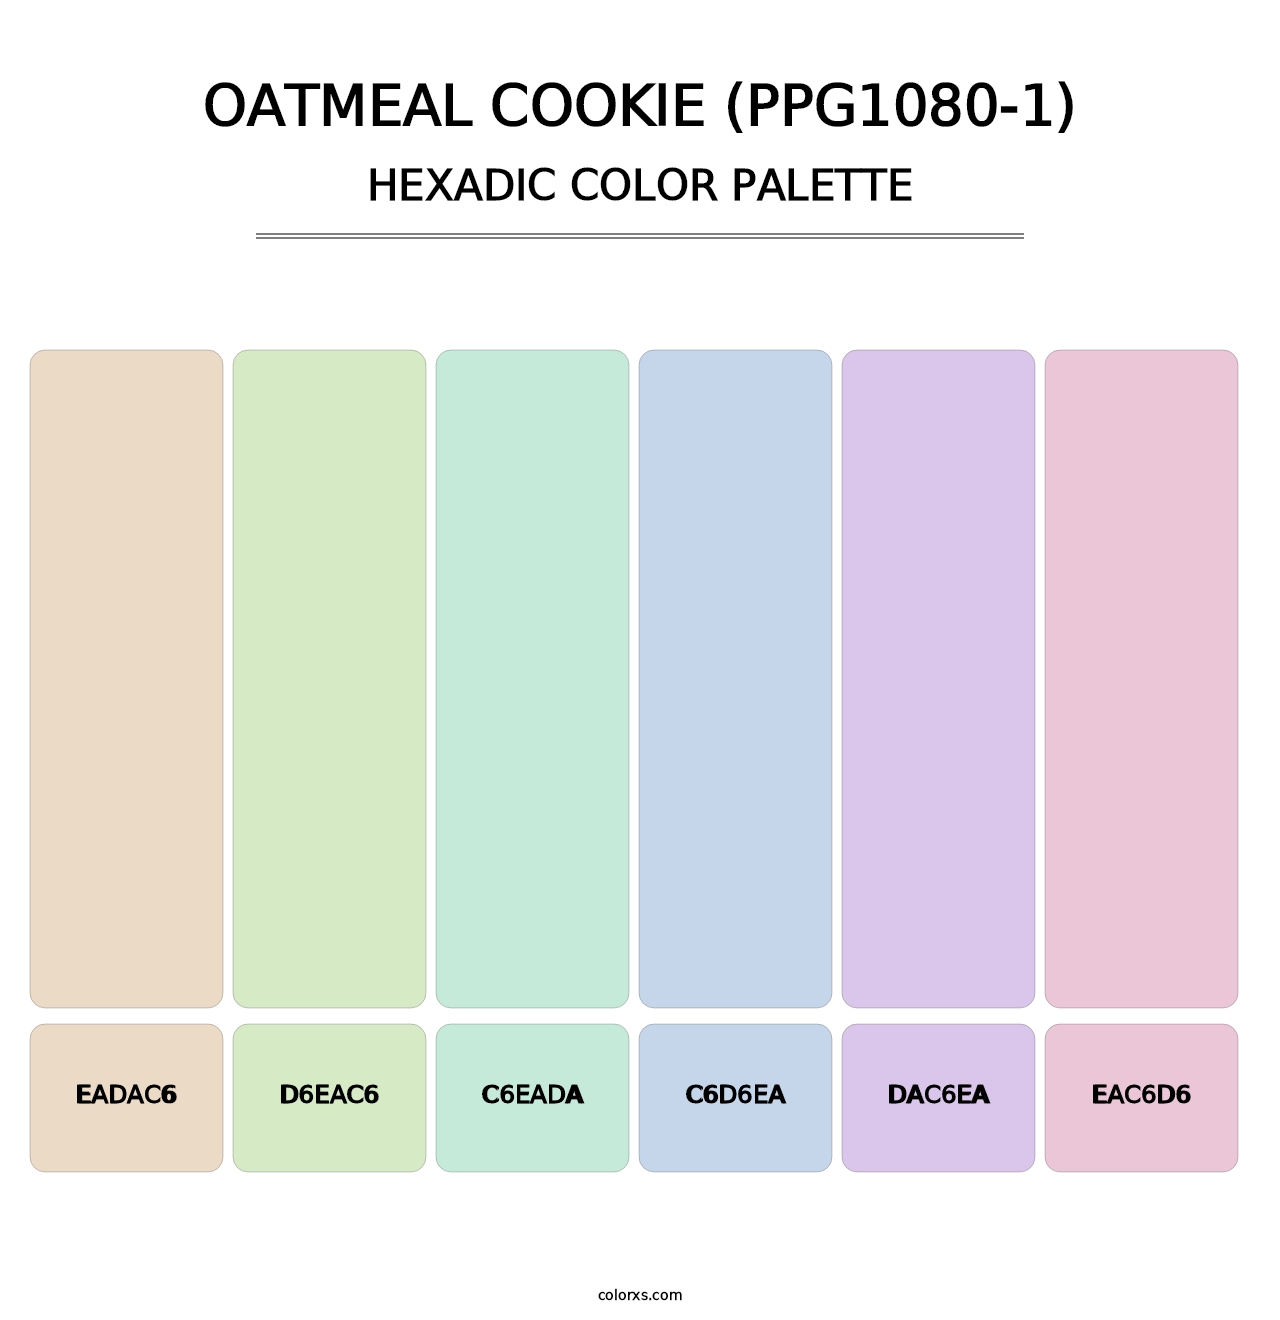 Oatmeal Cookie (PPG1080-1) - Hexadic Color Palette